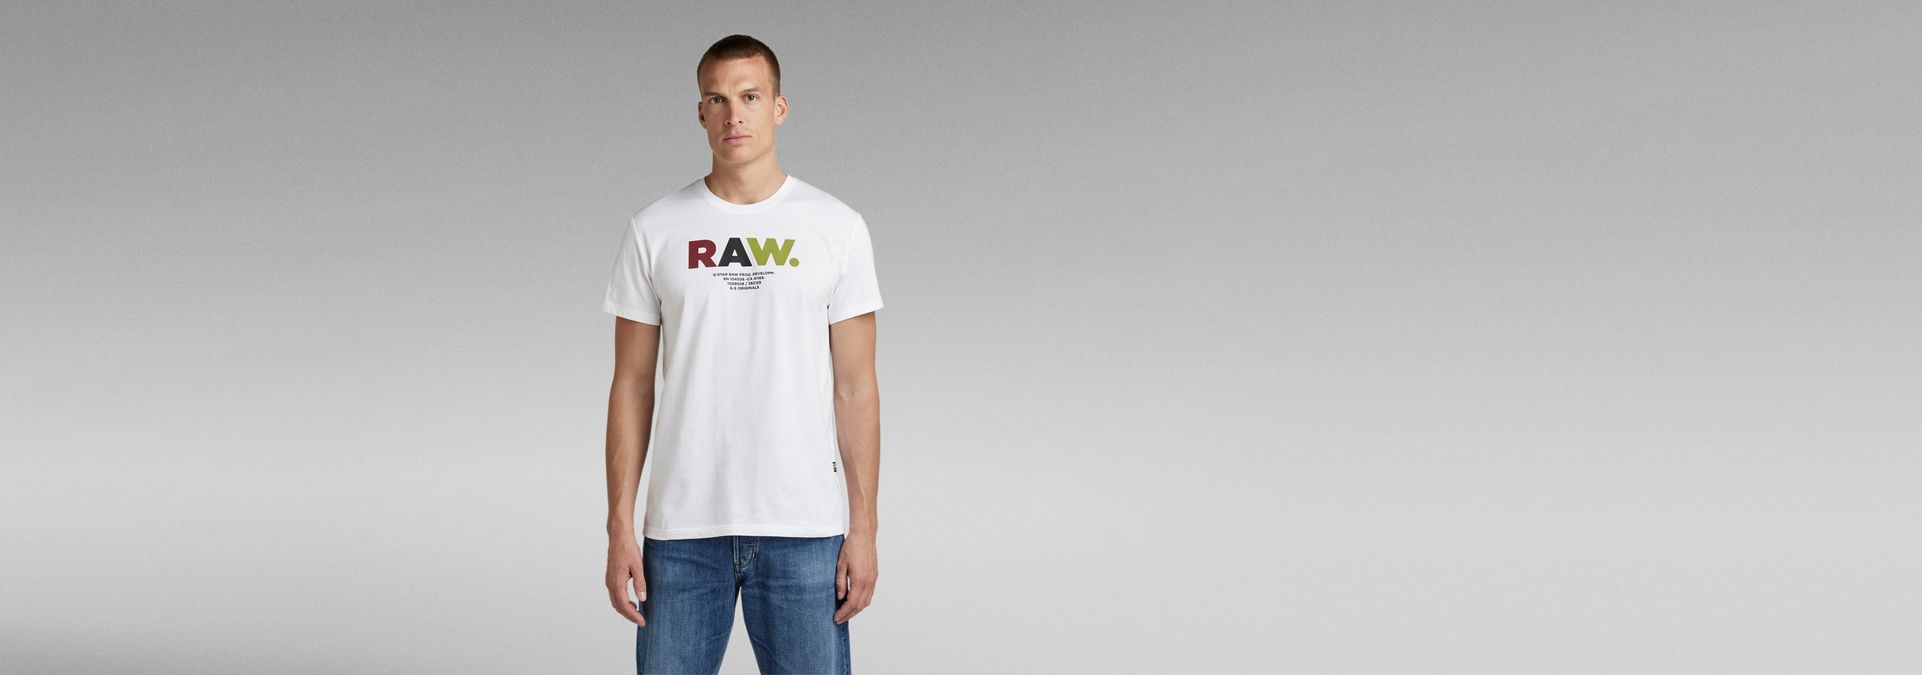 MULTI COLORED RAW. T-SHIRT